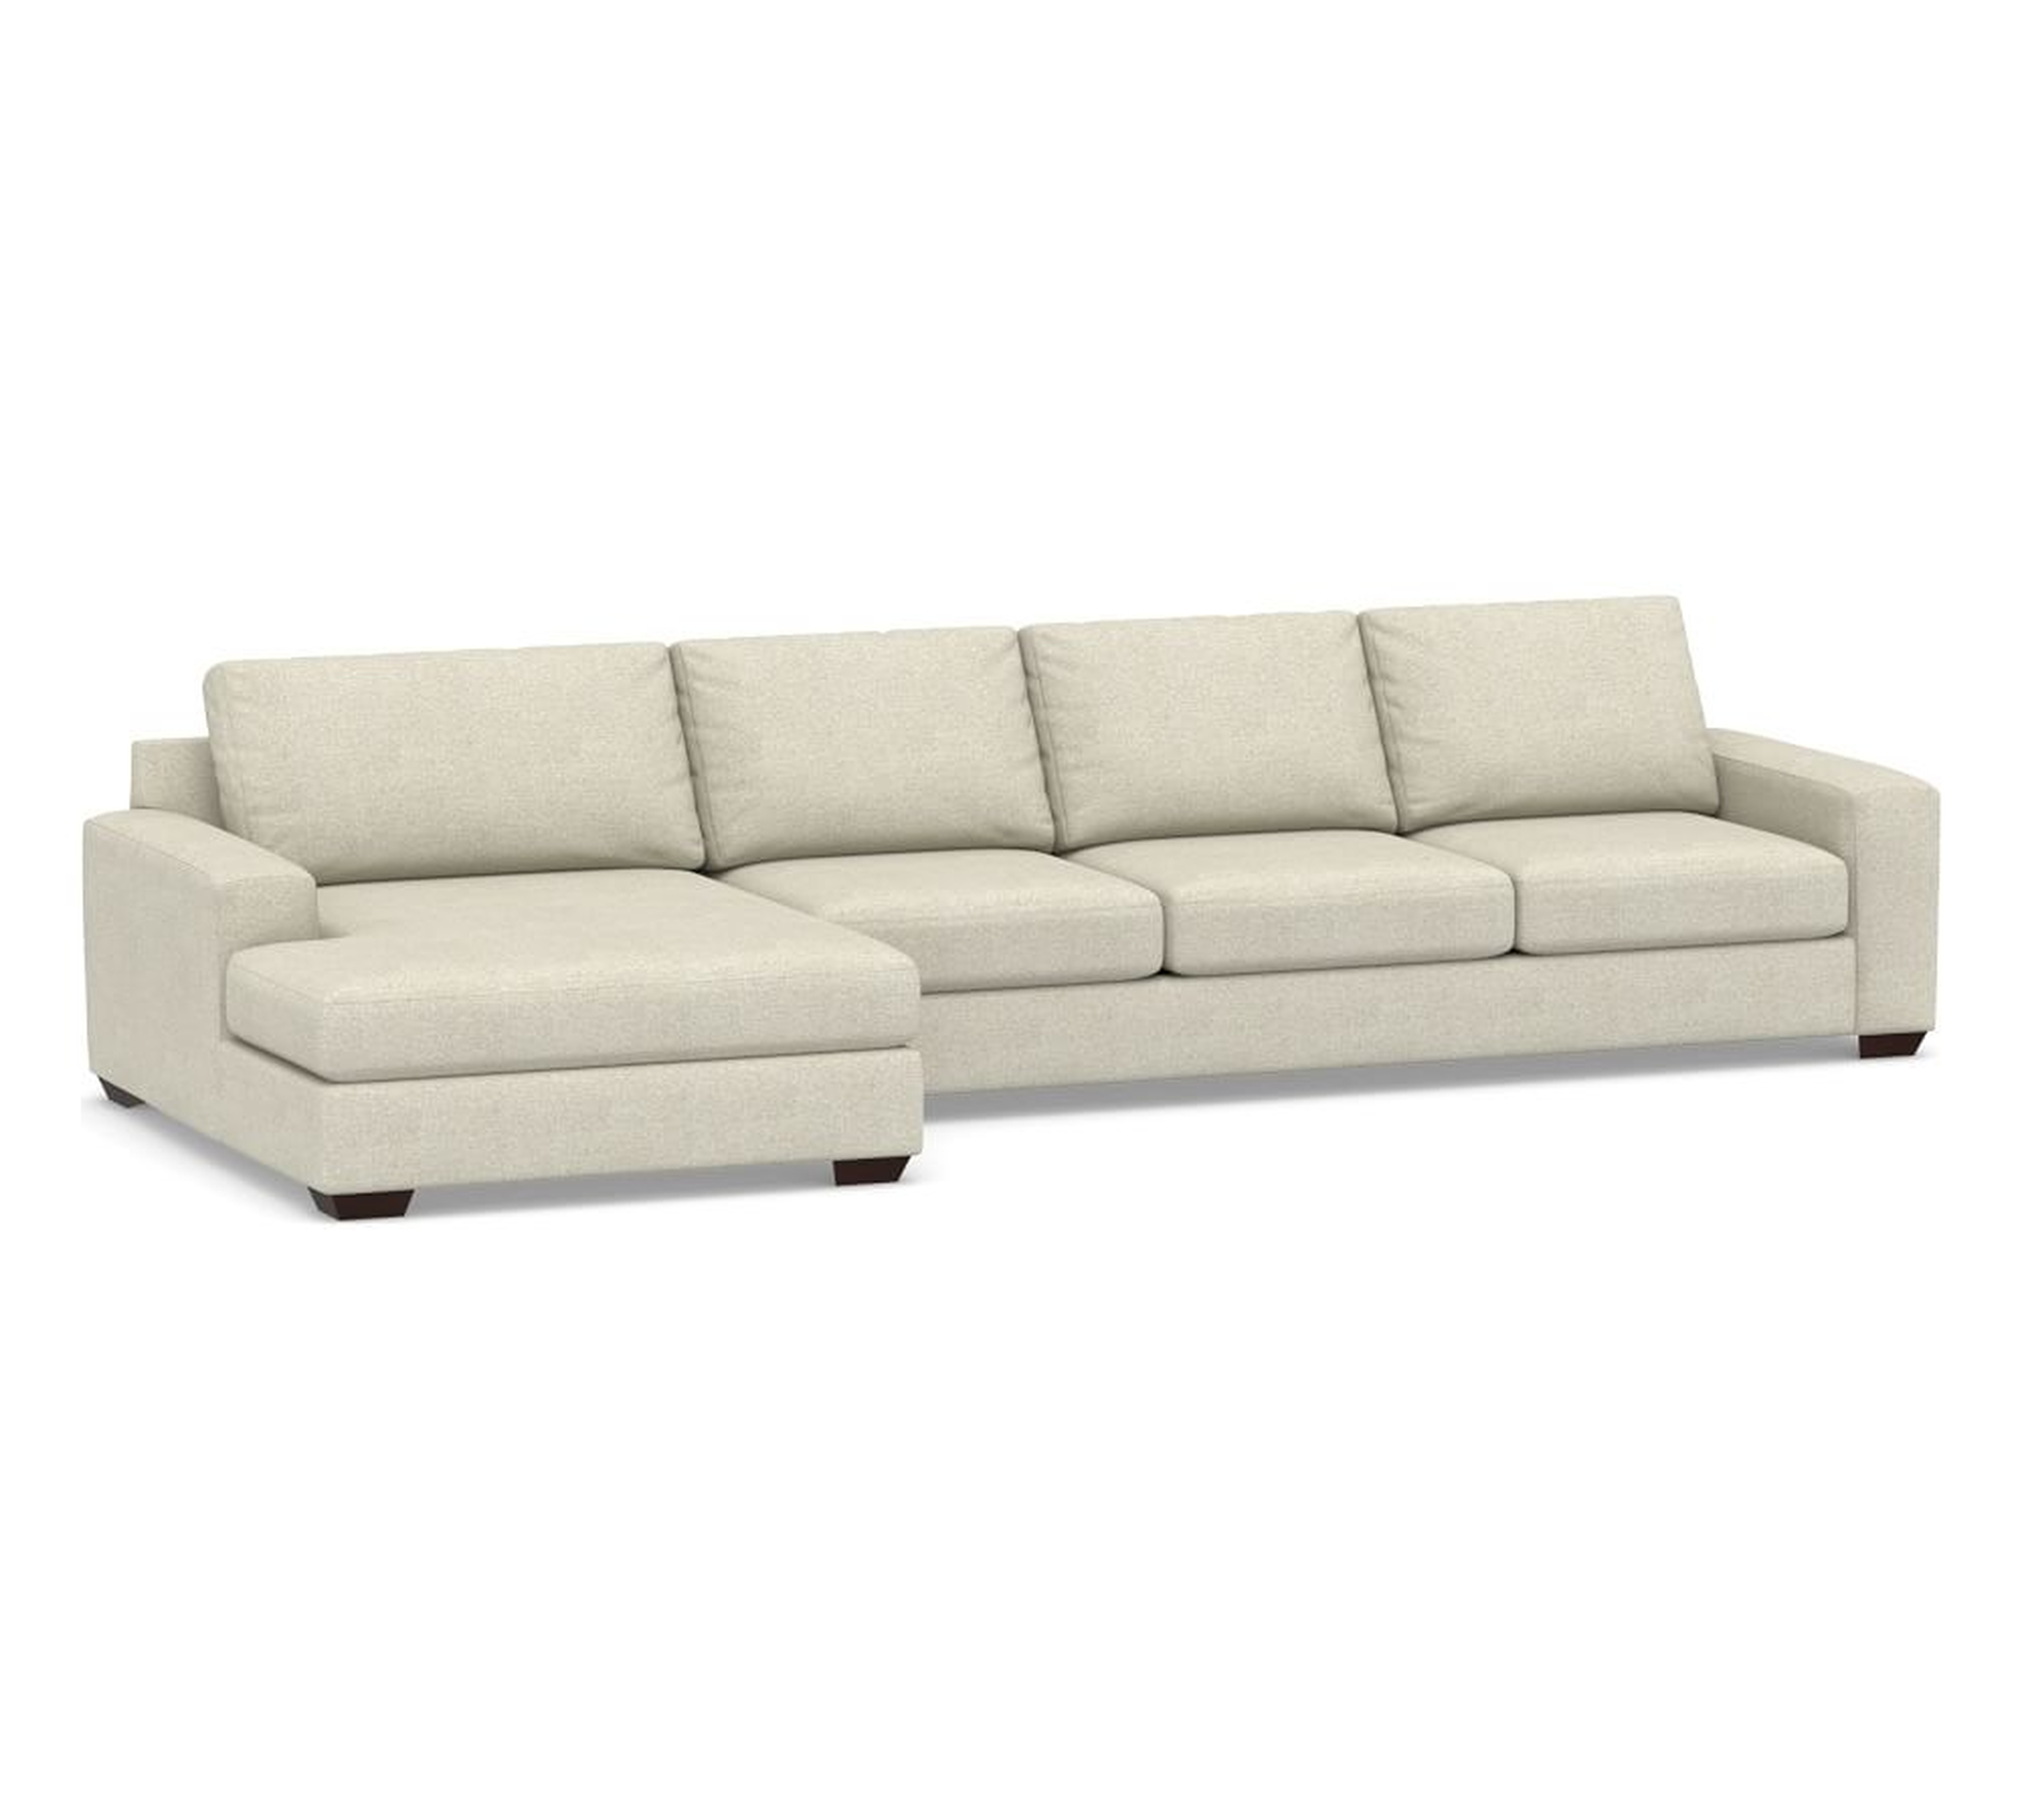 Big Sur Square Arm Upholstered Right Arm Grand Sofa with Double Chaise SCT, Down Blend Wrapped Cushions, Performance Heathered Basketweave Alabaster White - Pottery Barn